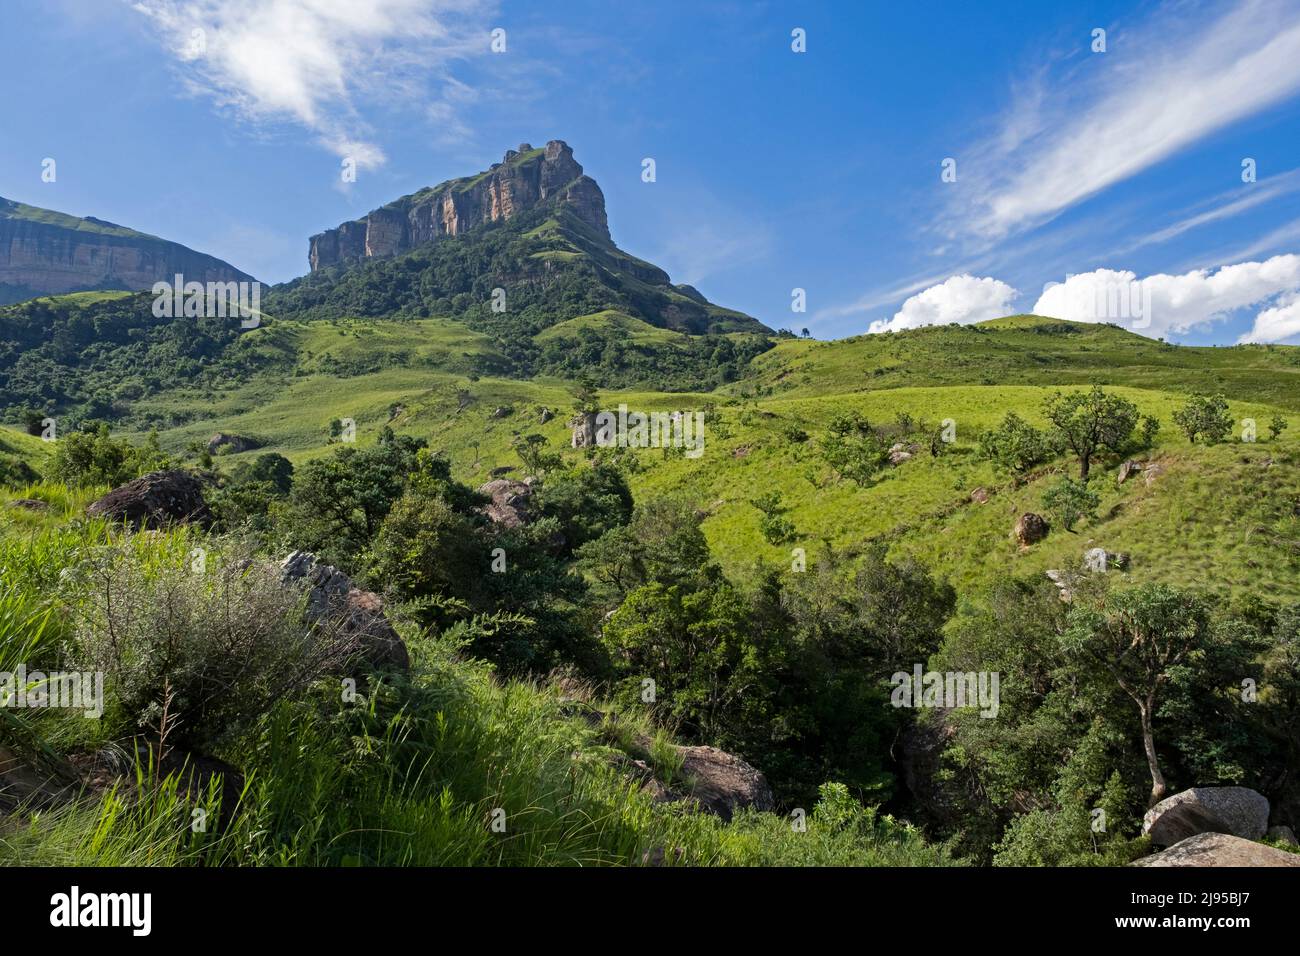 Lookout Rock, rocky outcrop in the Royal Natal National Park, KwaZulu-Natal, South Africa Stock Photo